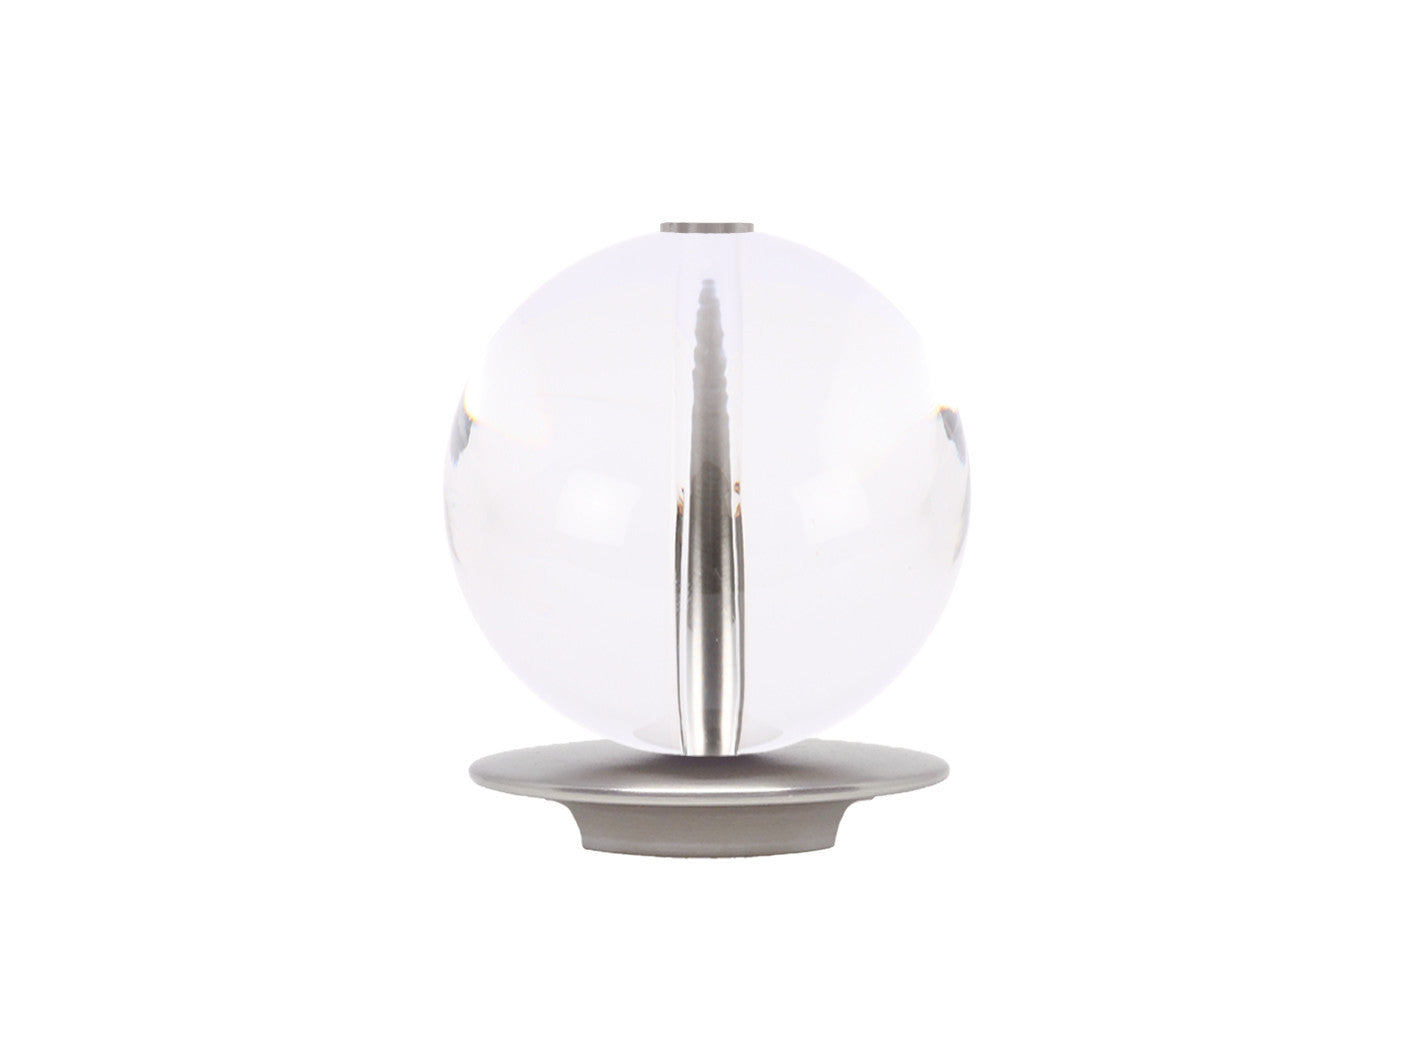 Acrylic ball finial for 30mm dia. curtain poles with brushed steel adapter